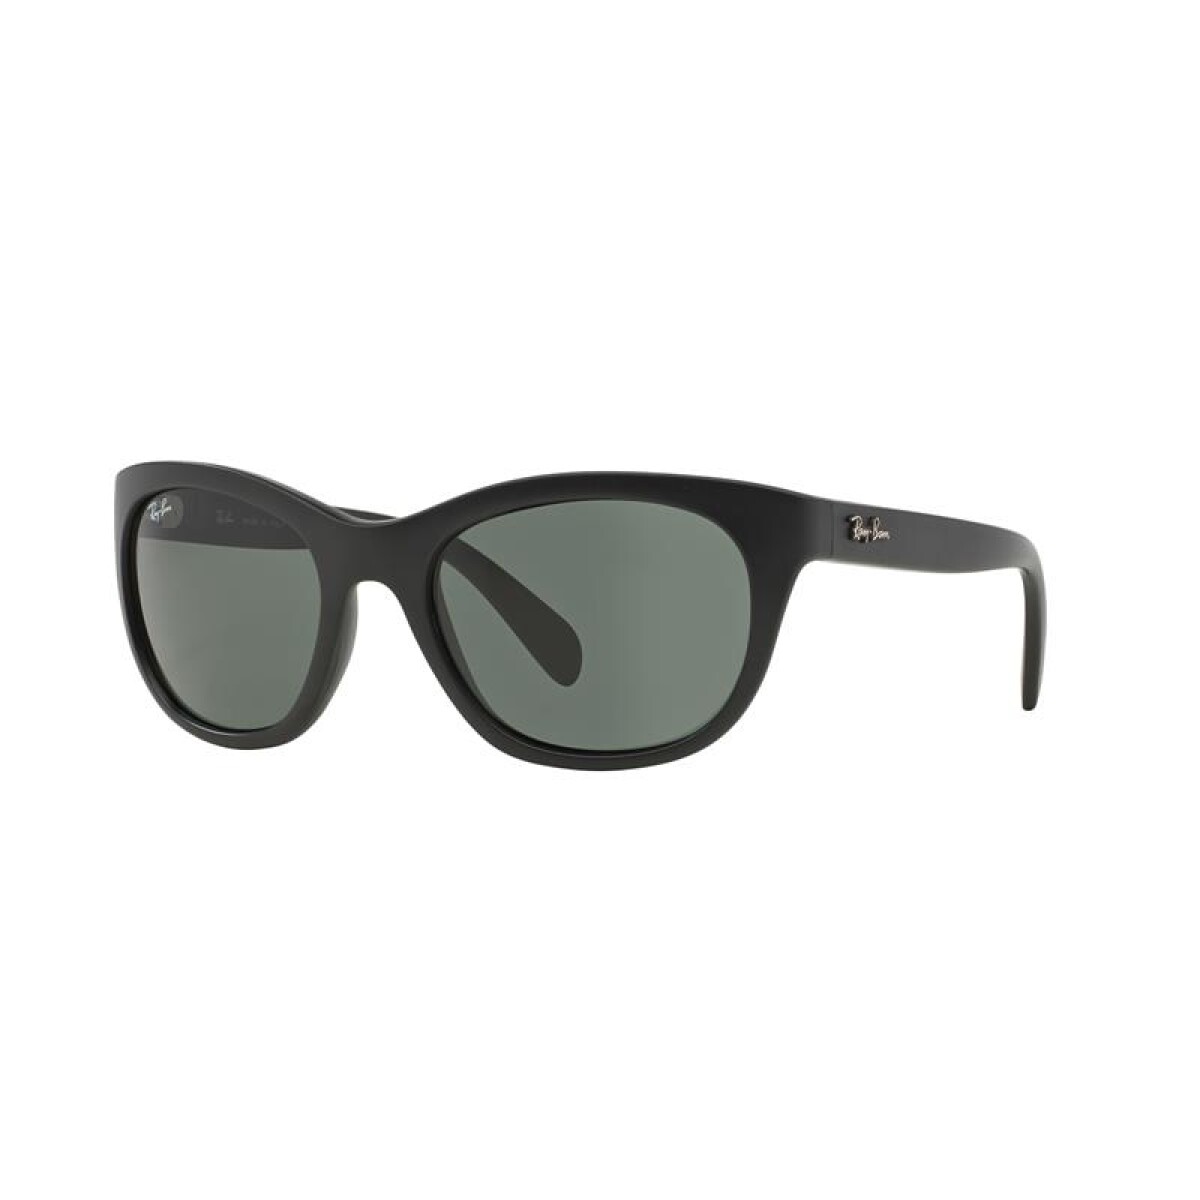 Ray Ban Rb4216 - 601-s/71 